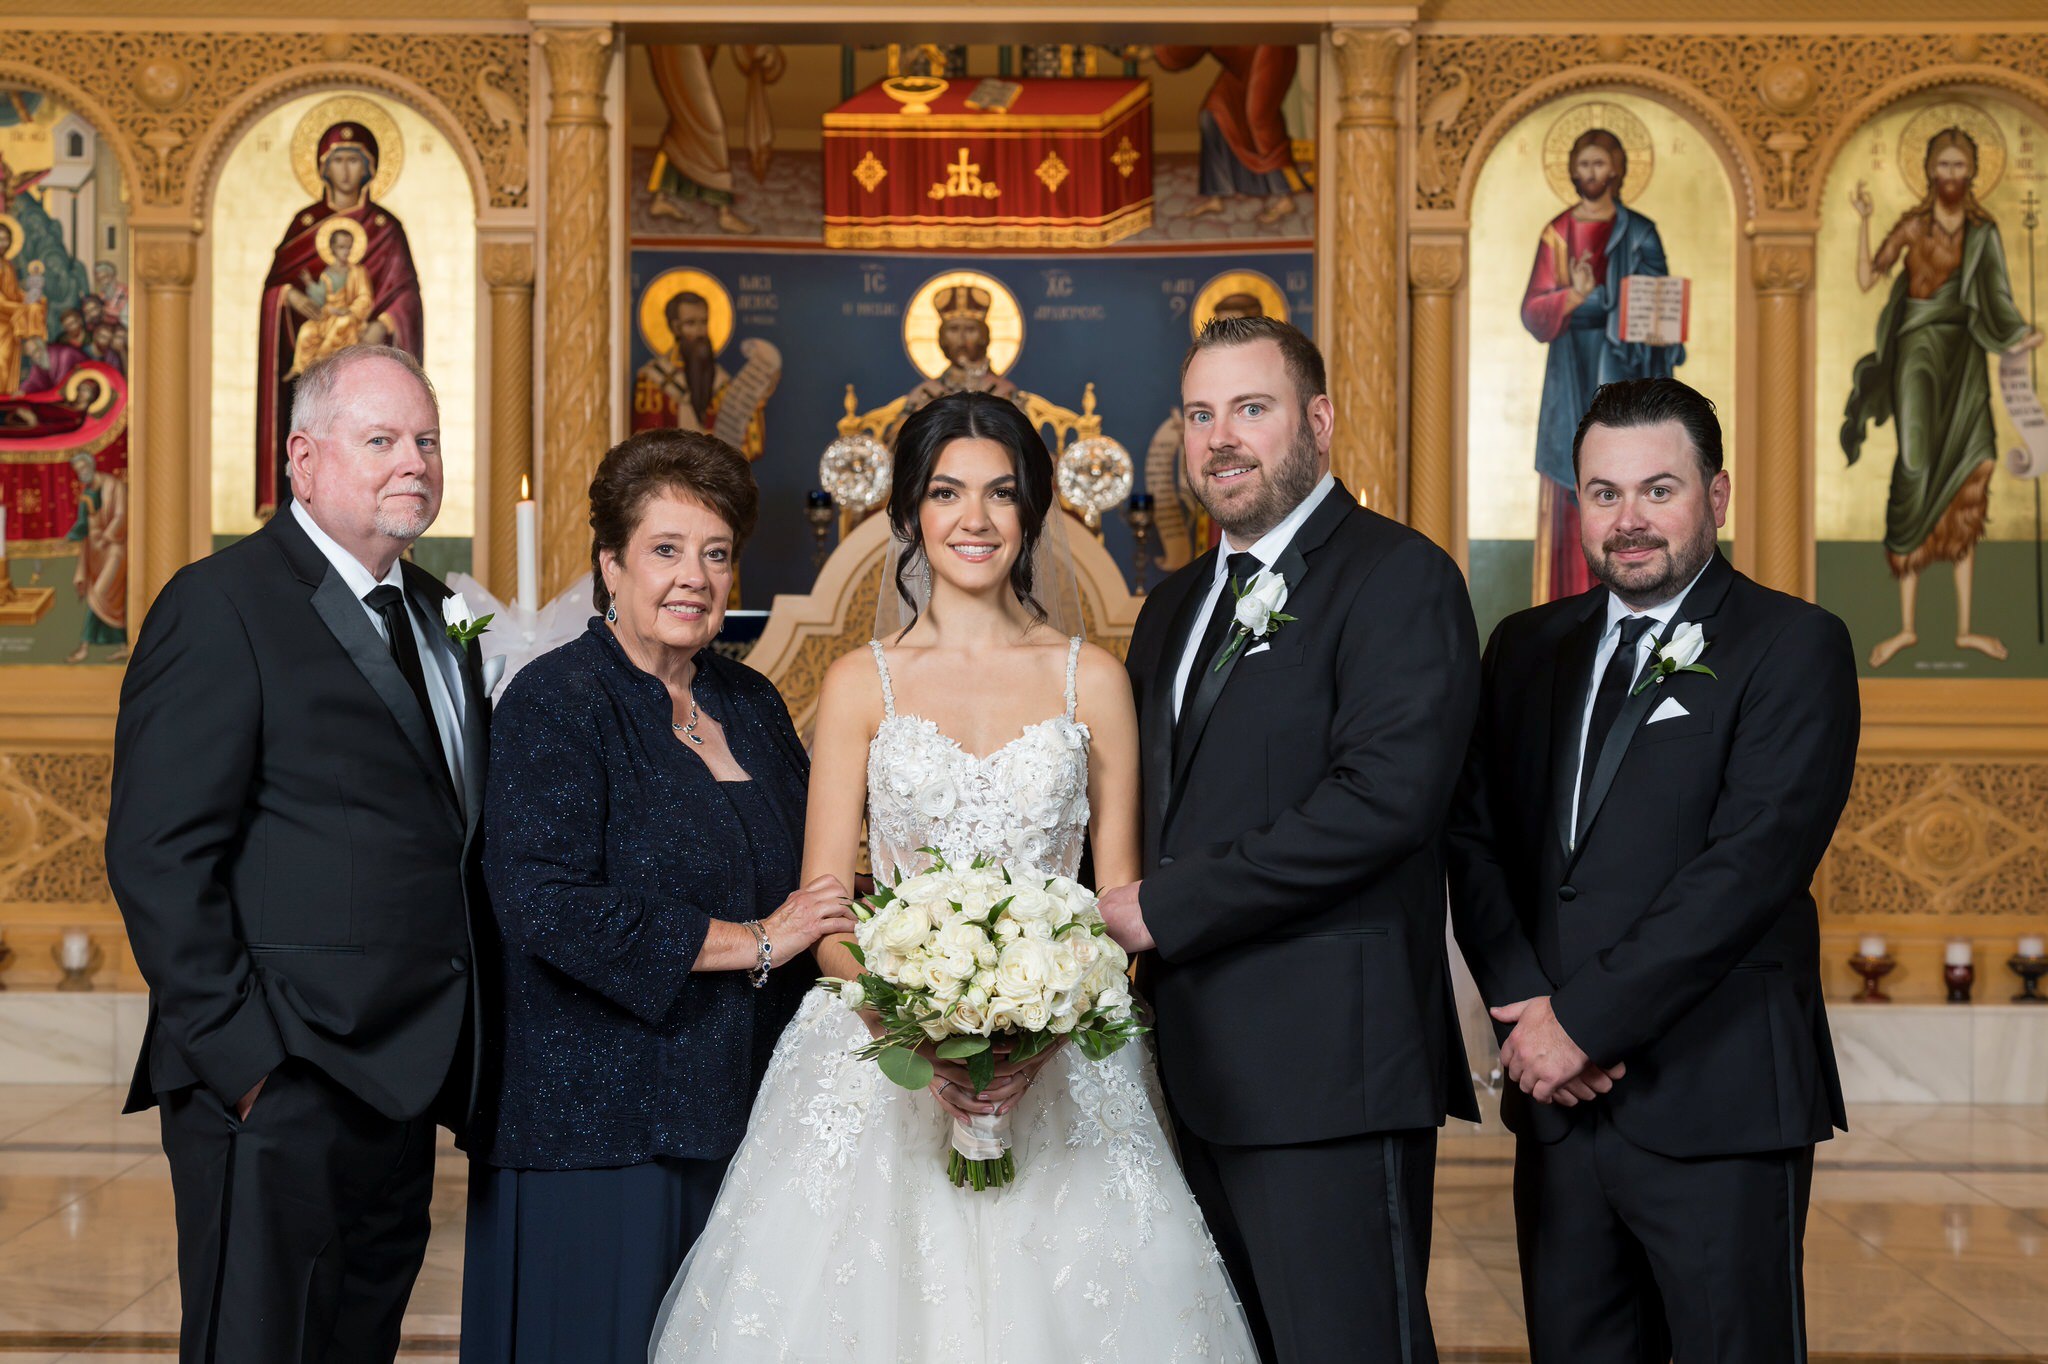 A family formal at the altar of an Assumption Greek Orthodox wedding in St. Clair Shores, Michigan. 